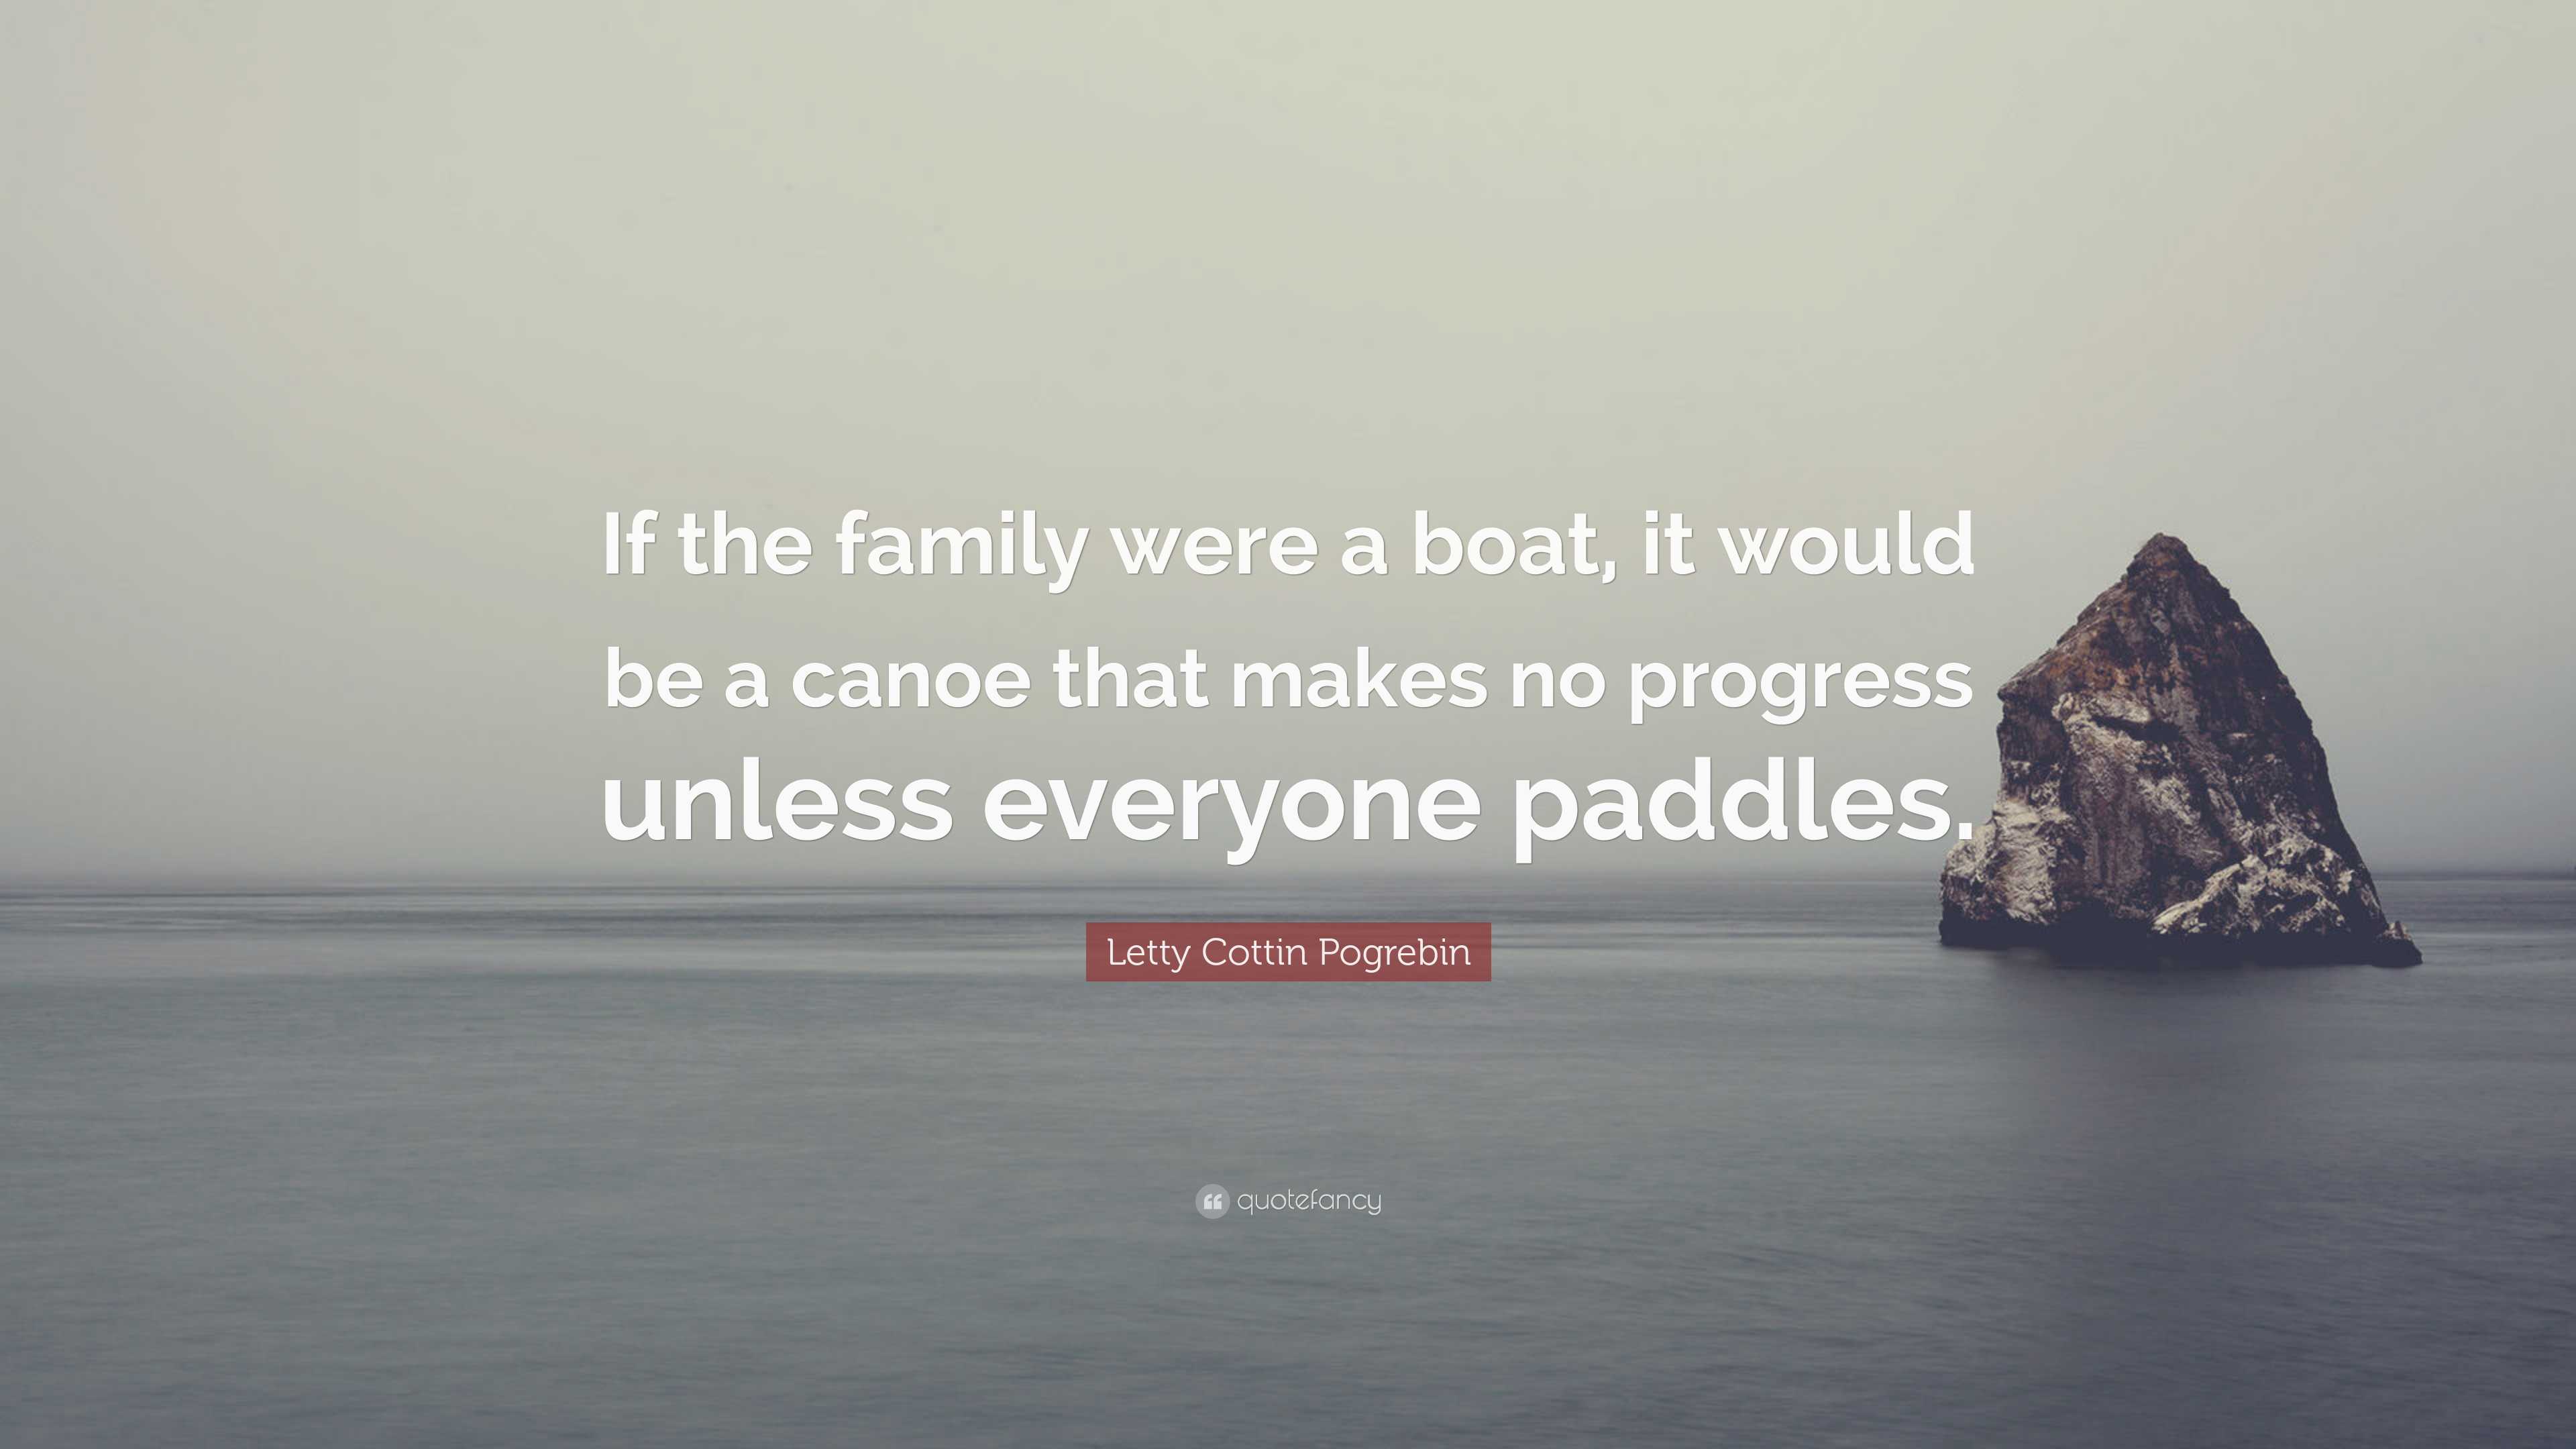 Letty Cottin Pogrebin Quote: “If the family were a boat, it would be a ...